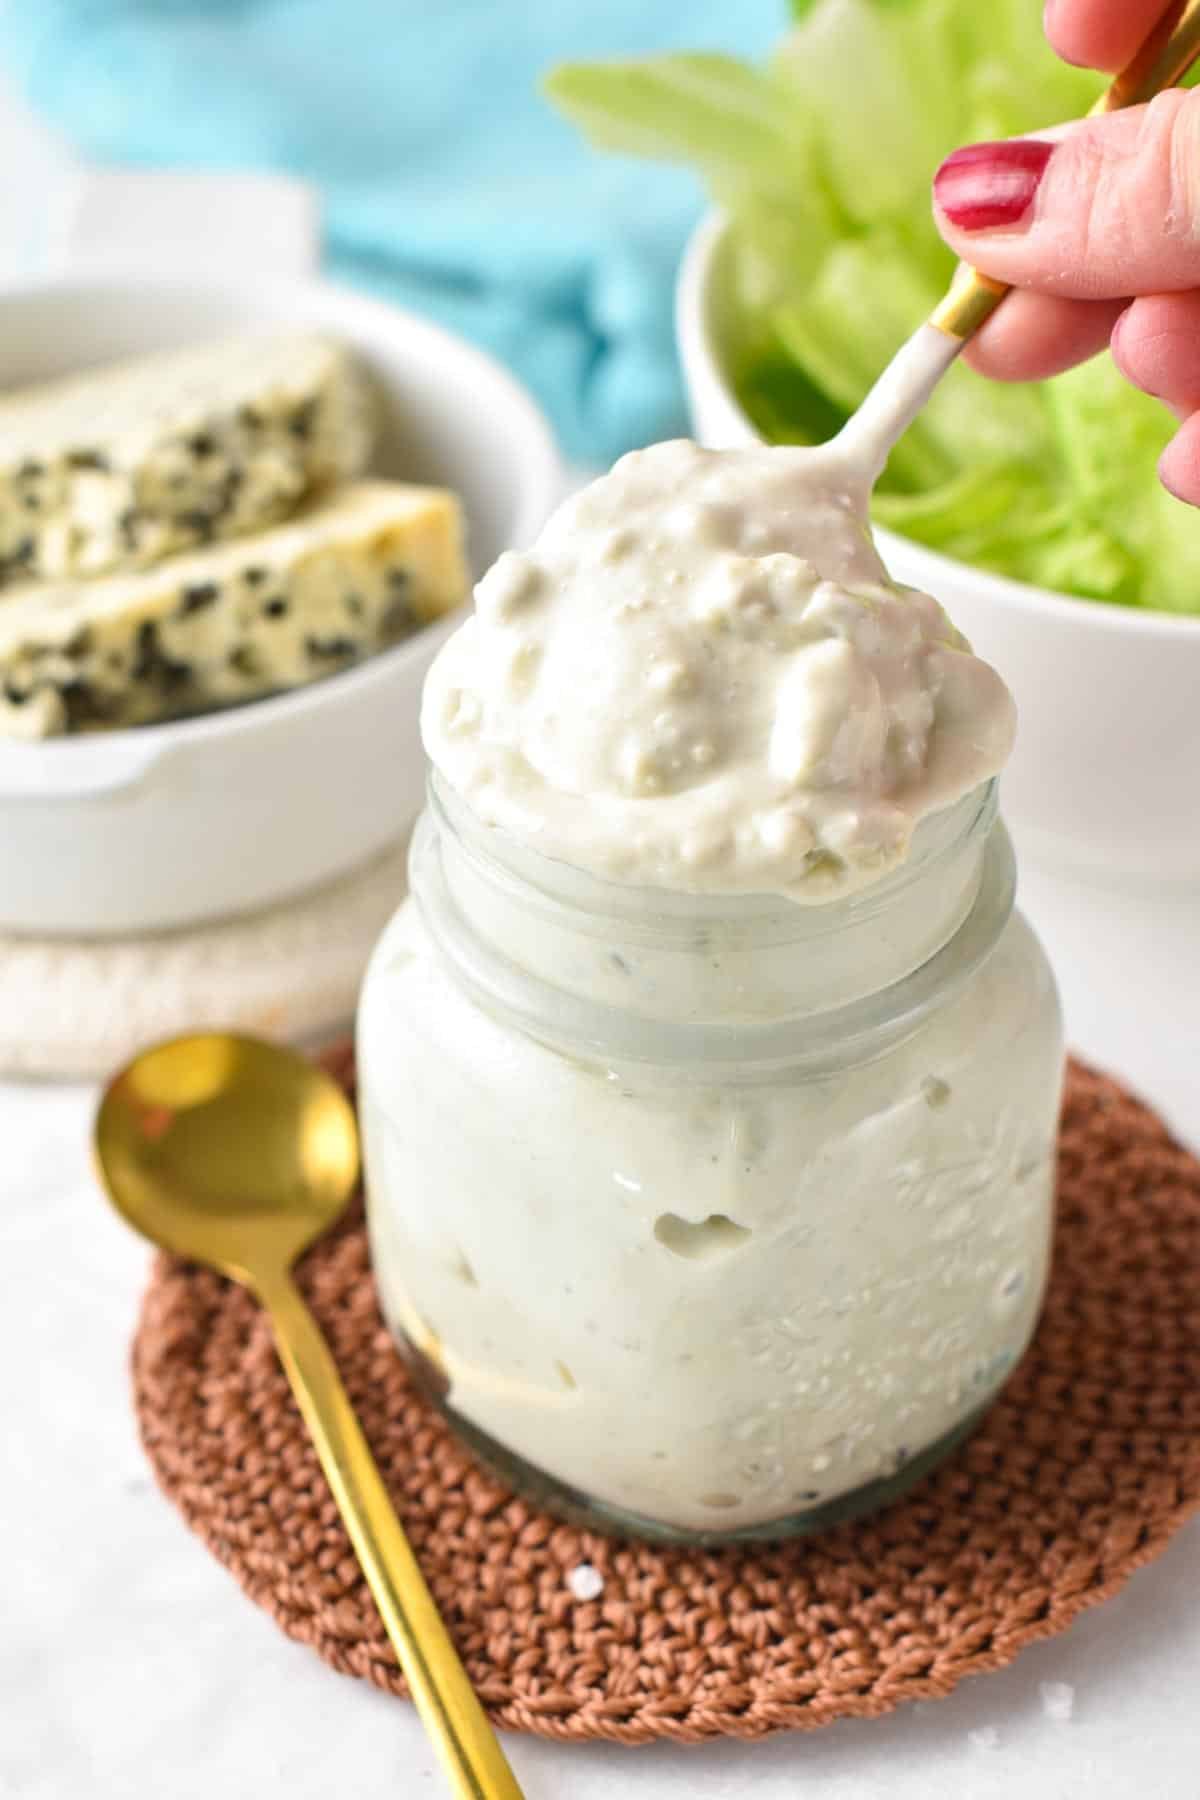 This creamy Gorgonzola dressing is a delicious cheesy salad dressing or dip for raw vegetables packed with cheesy flavors.